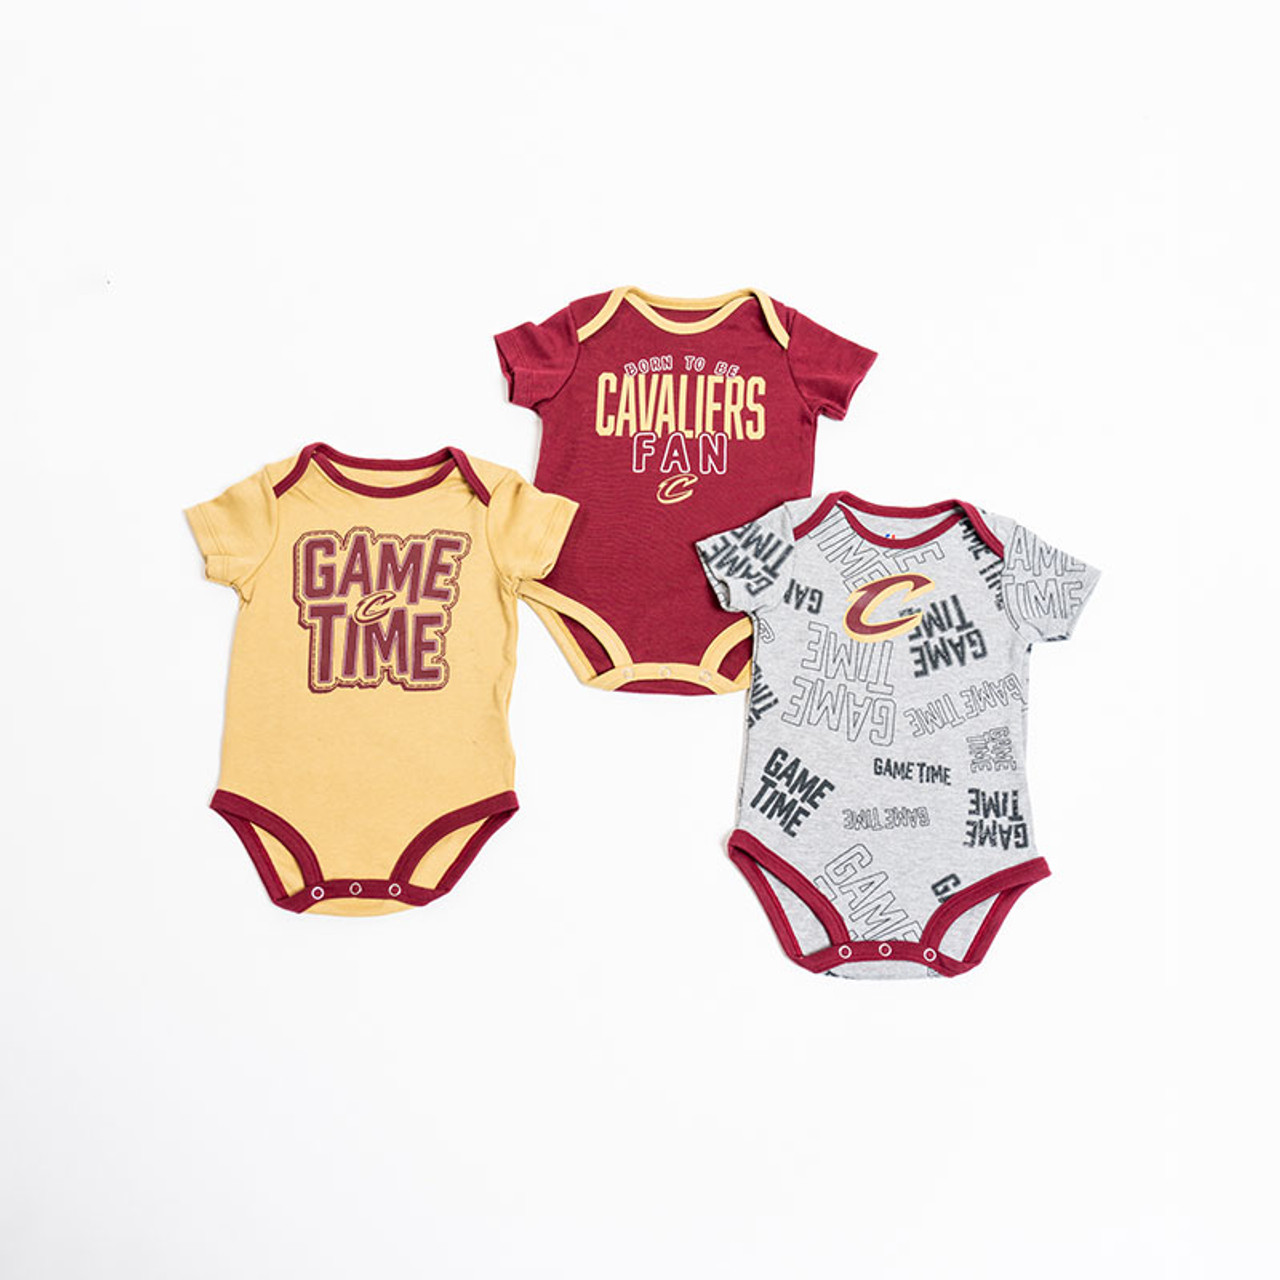 Cleveland Cavaliers Baby Clothing, Cavaliers Infant Jerseys